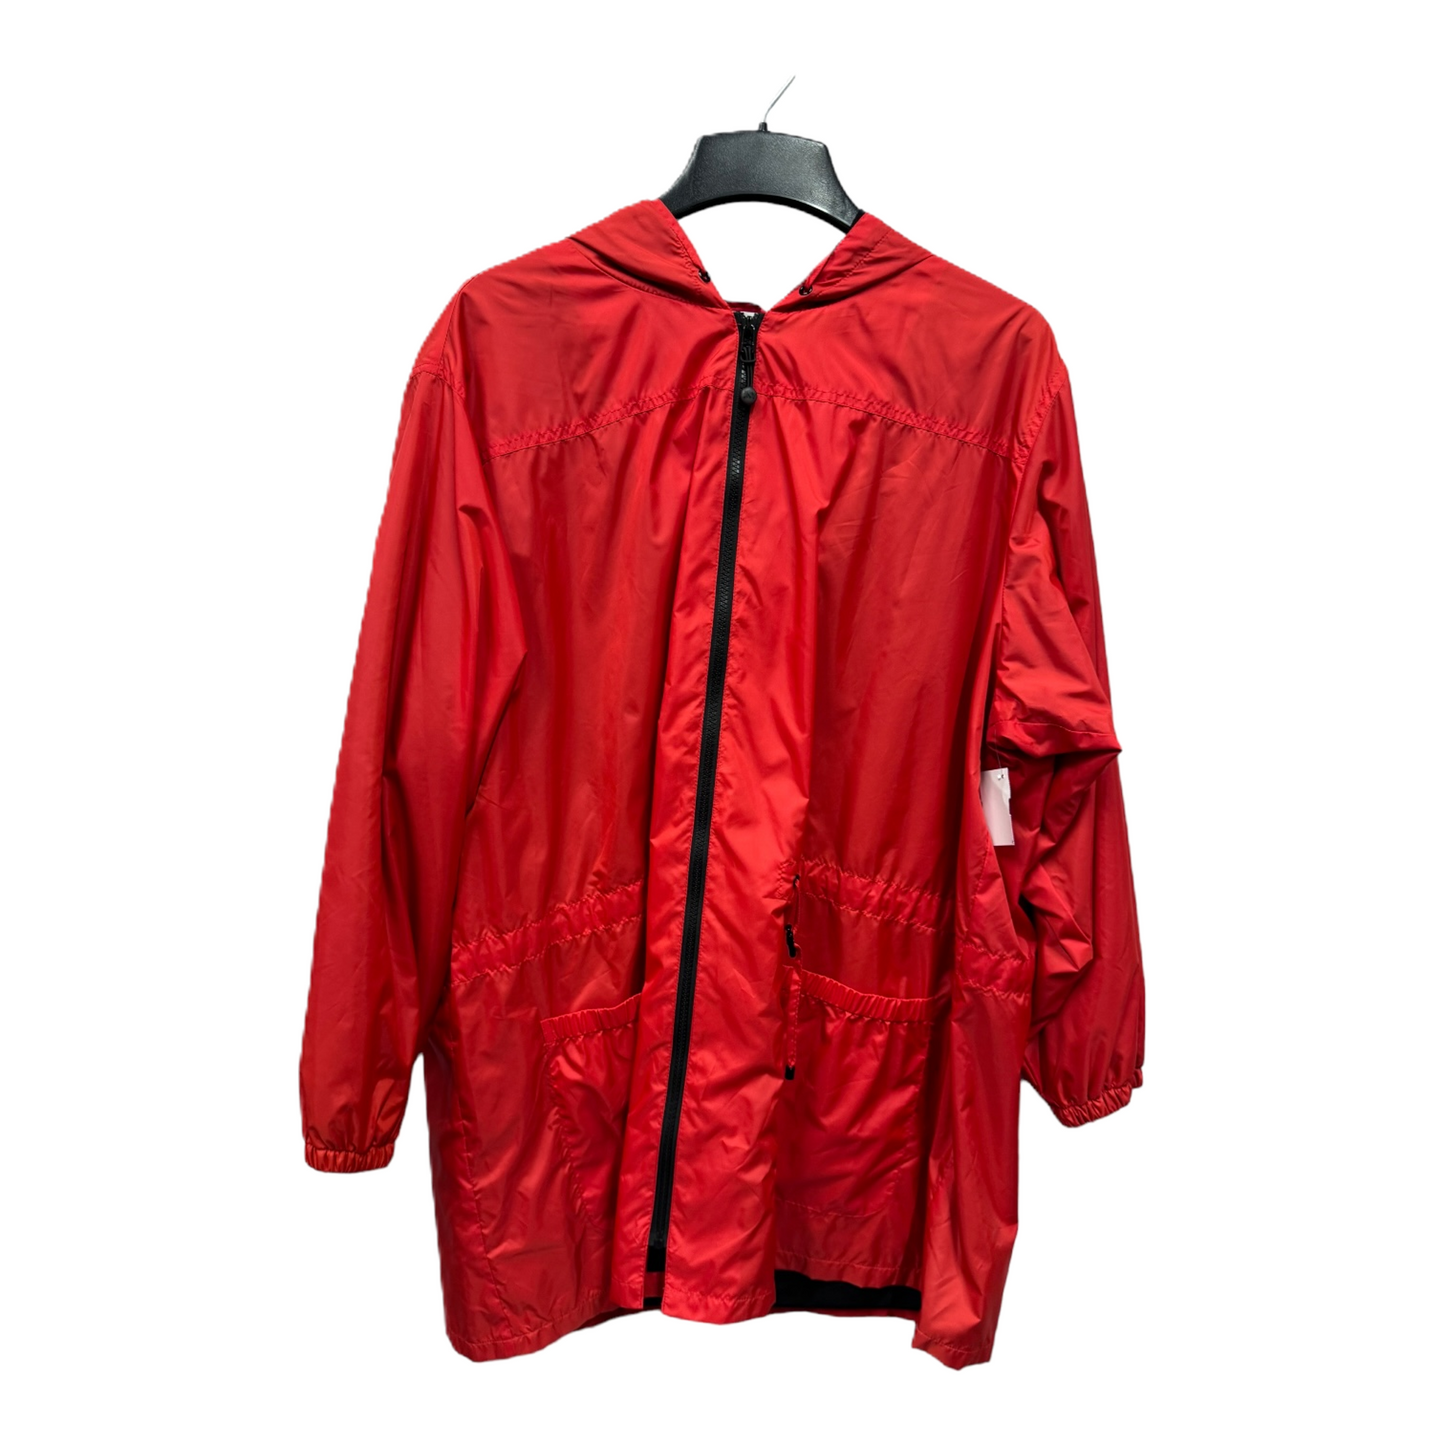 Red Athletic Jacket By Jones New York, Size: 3x